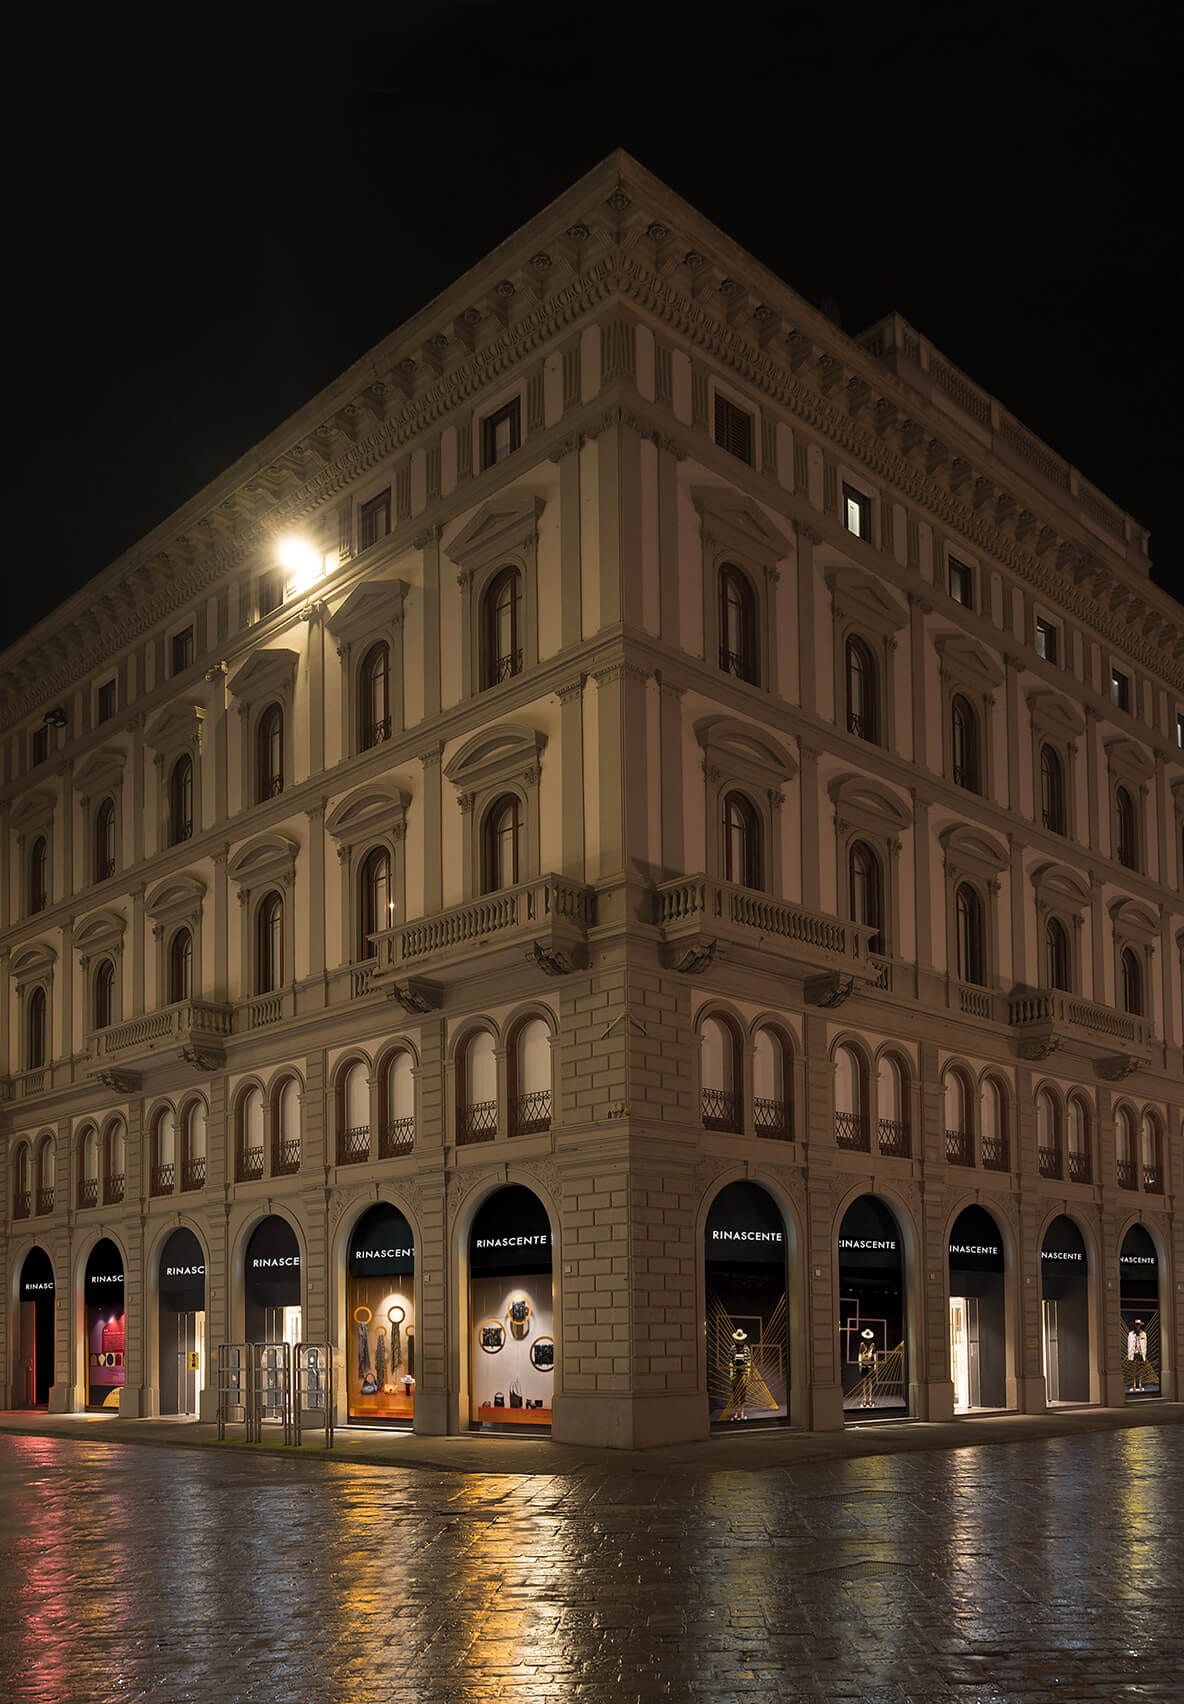 The Store of Craft in Florence is completed